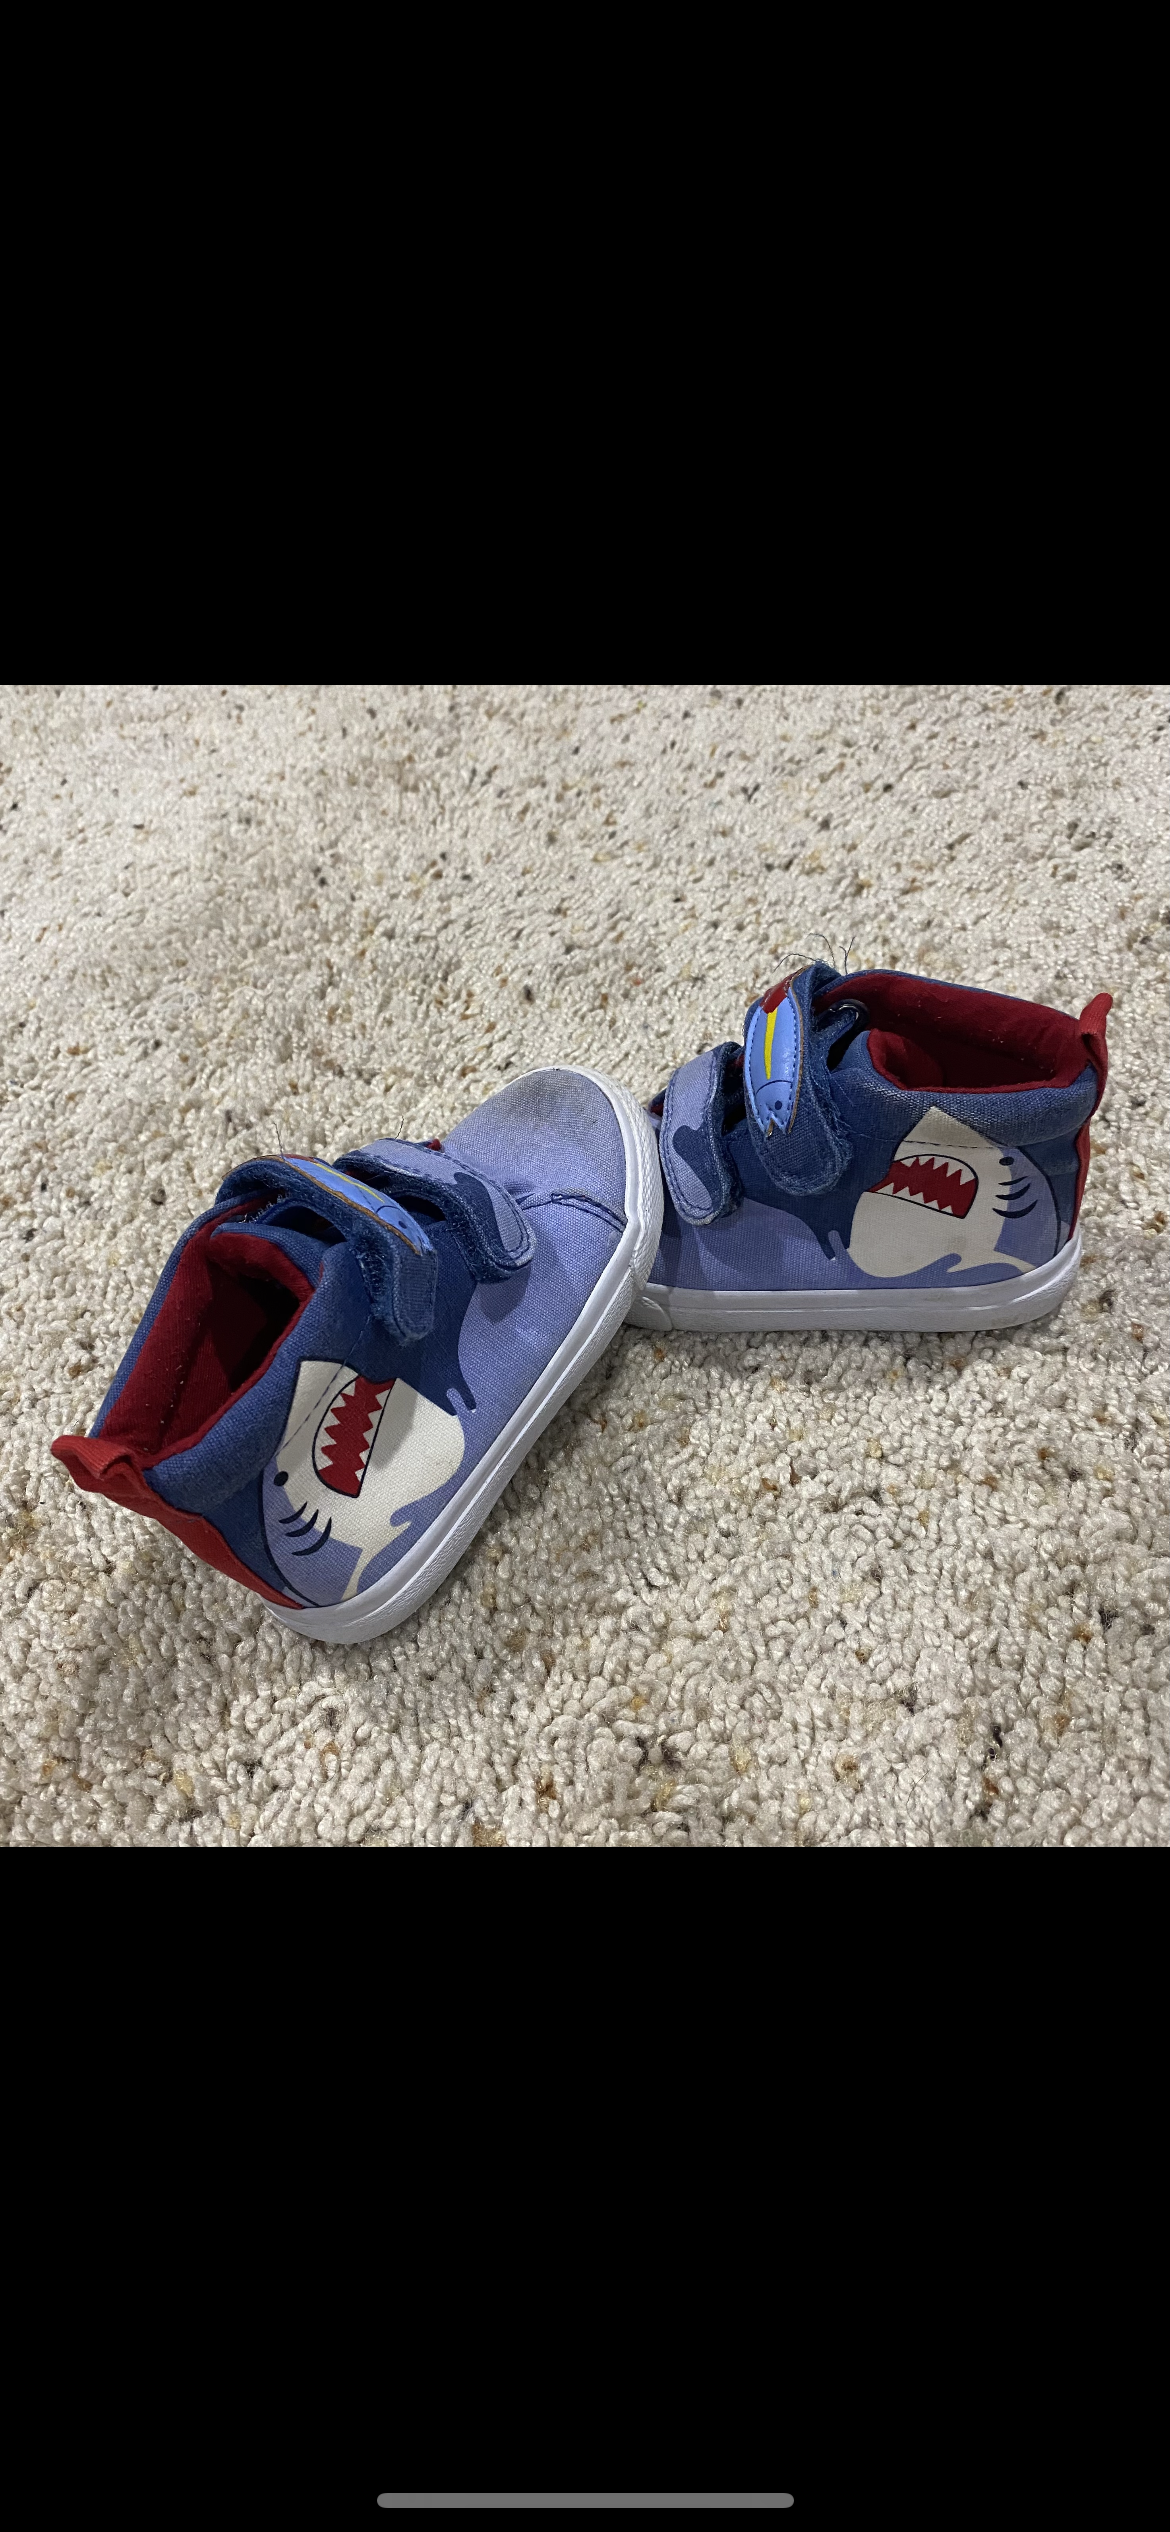 Toddler size 7 shark shoes